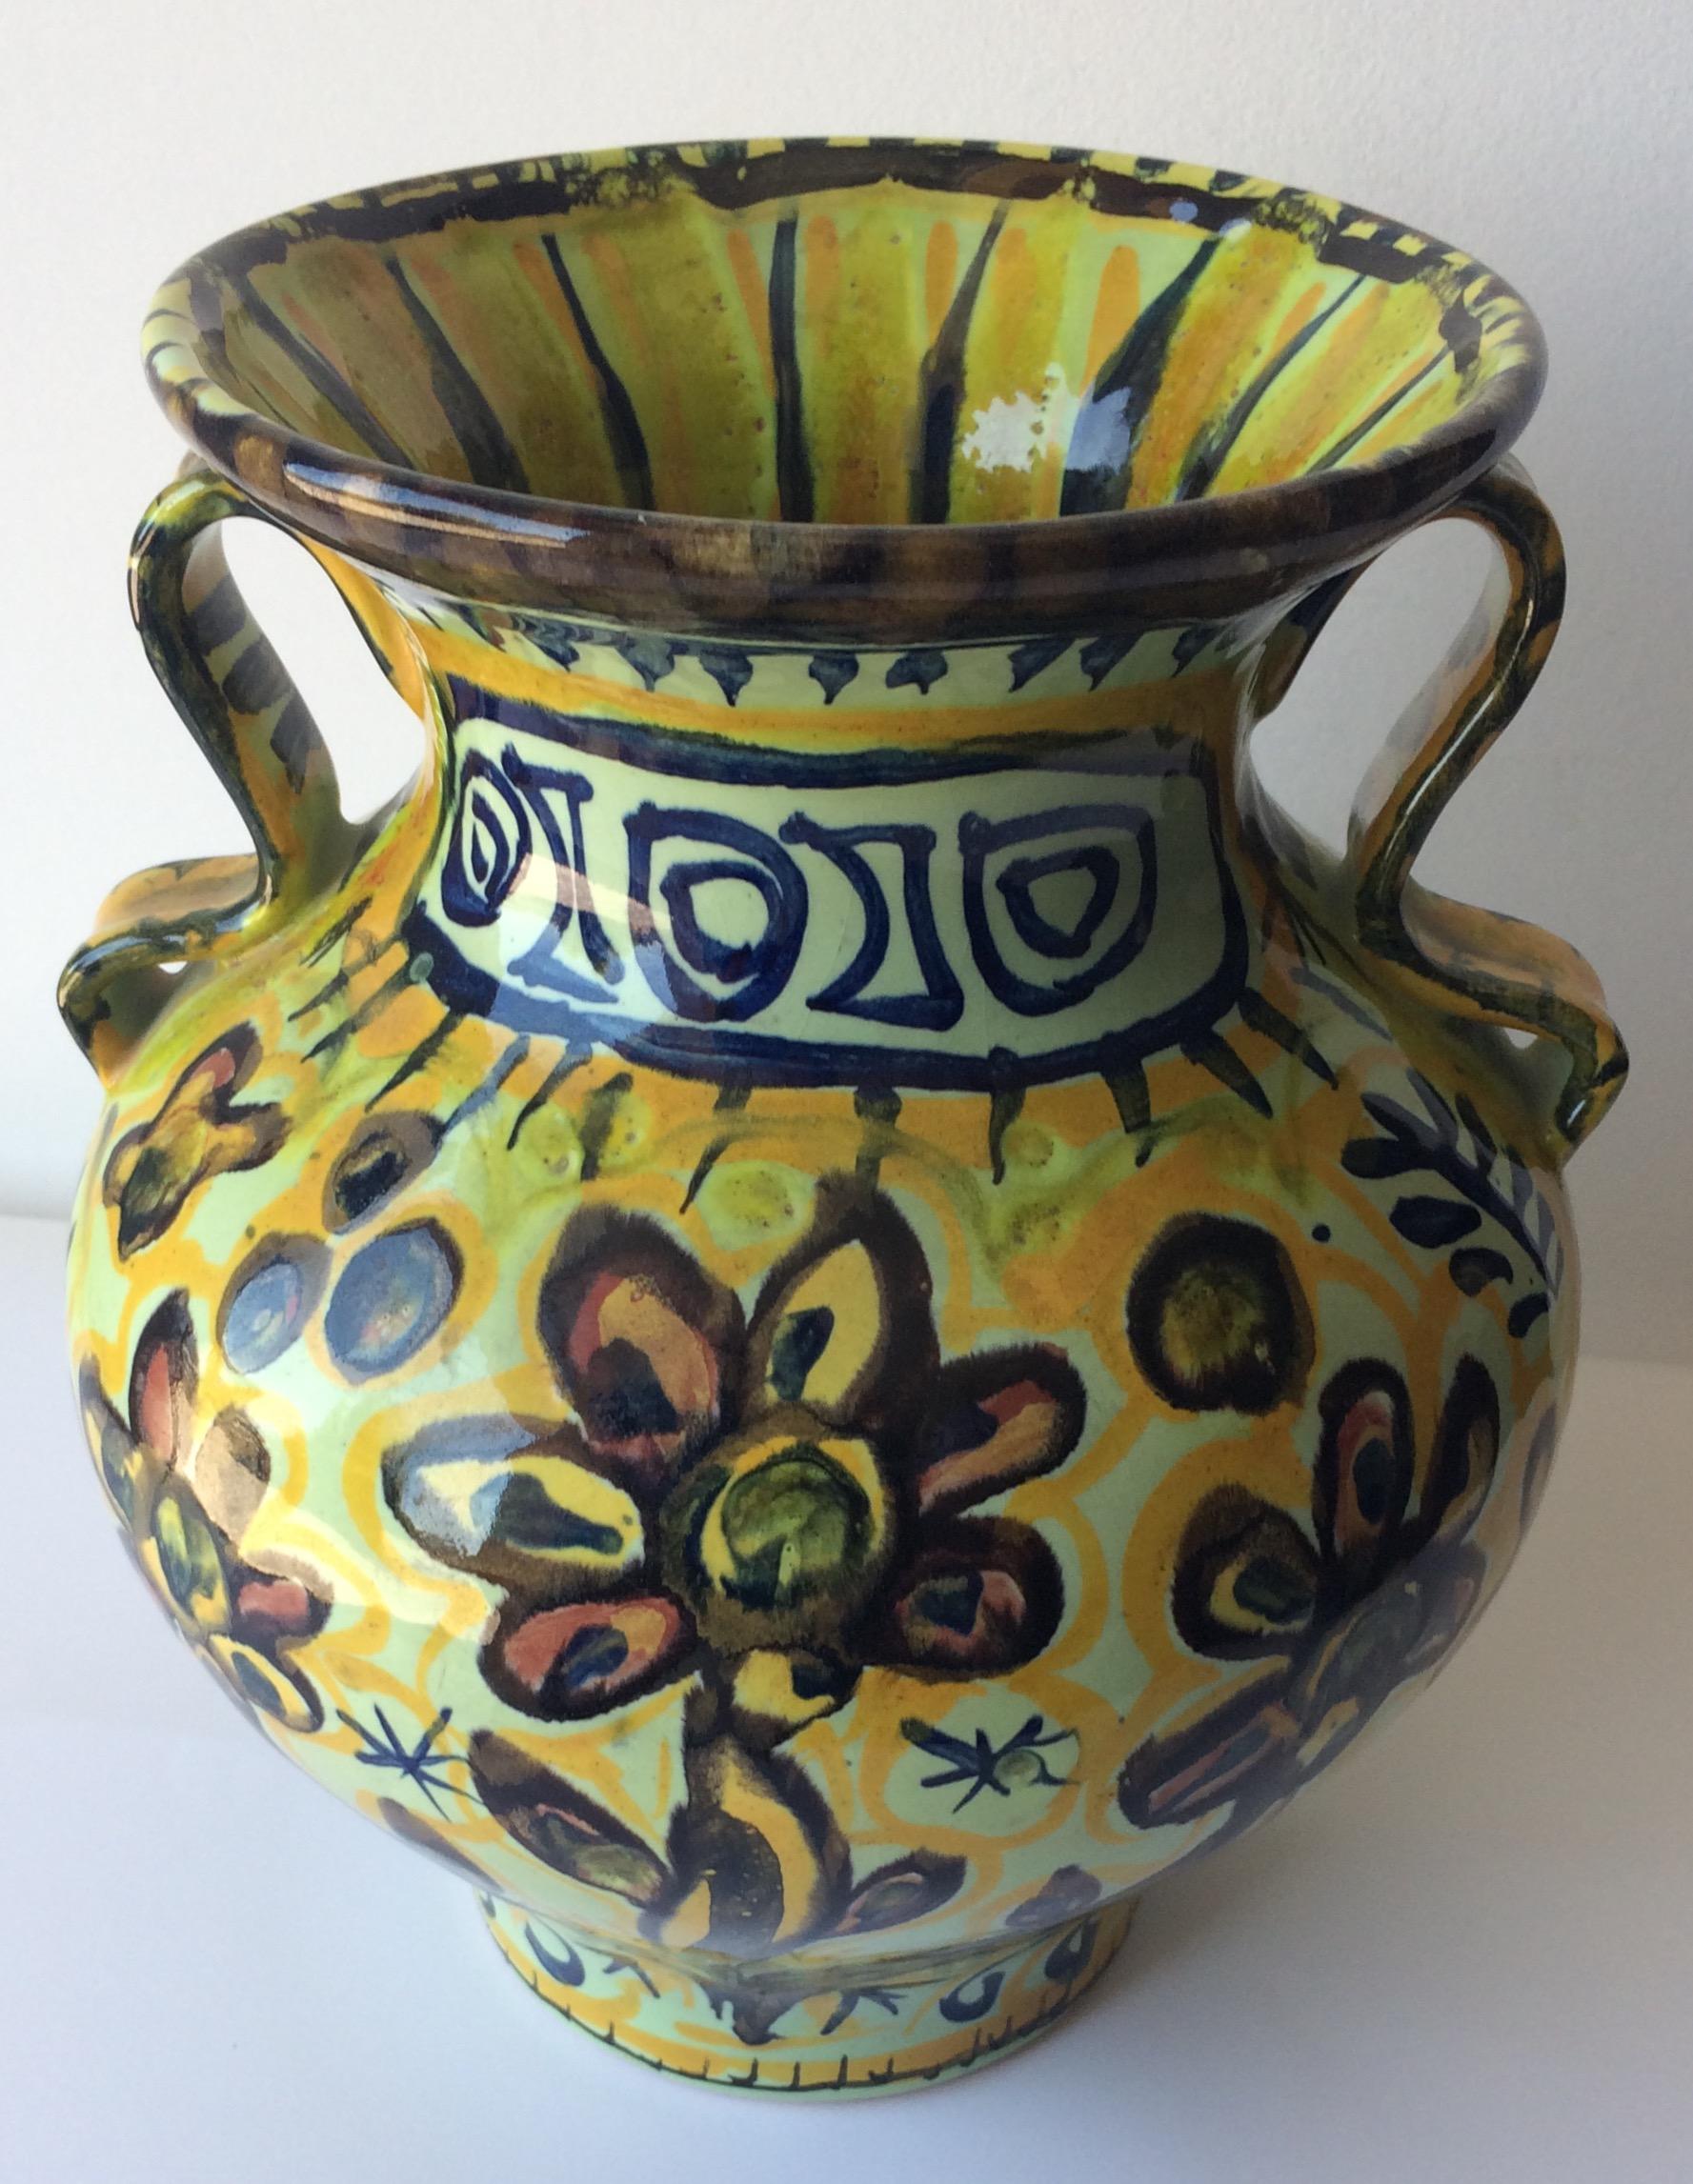 Glazed French Ceramic Vase with Handles from Quimper, France by Keraluc Pottery Studio